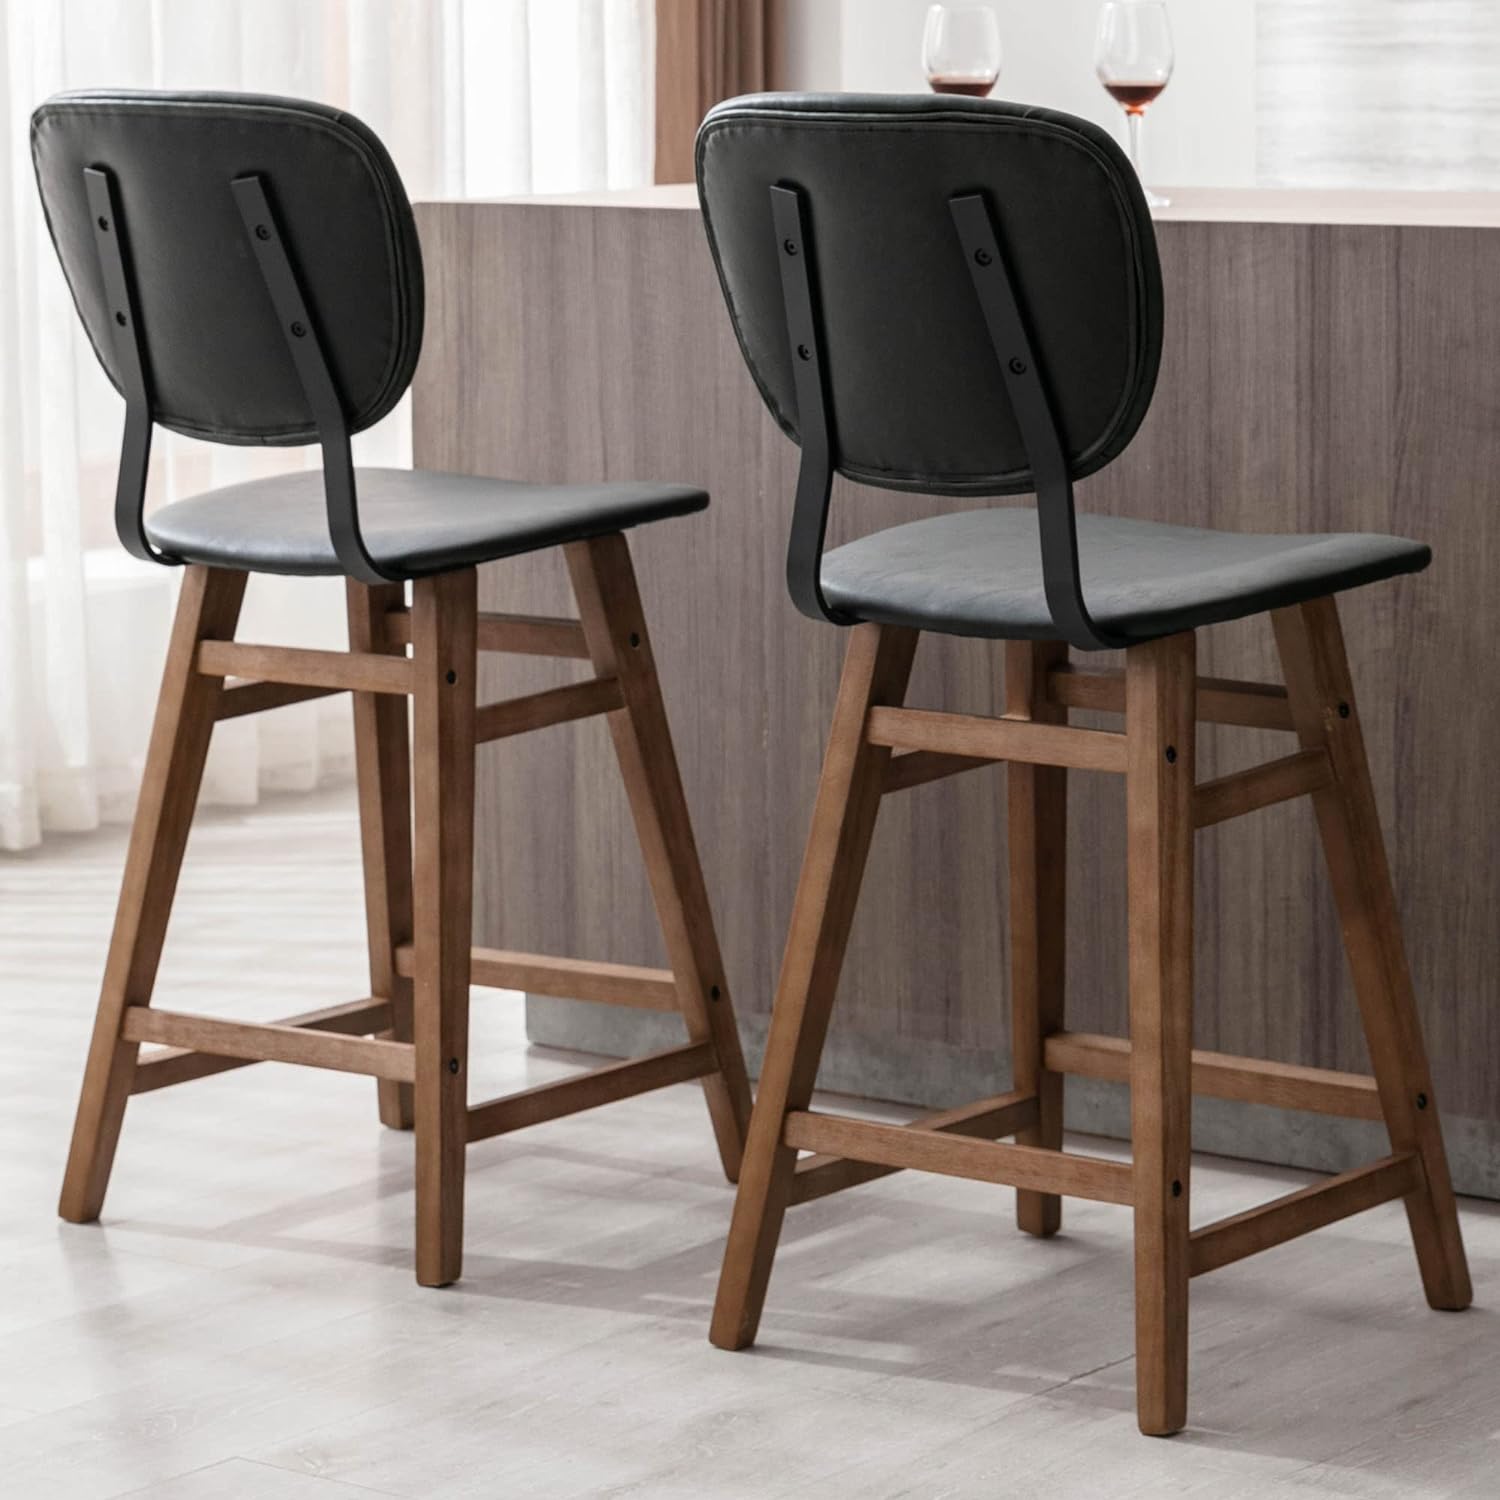 VESCASA Modern Counter Bar Stools with Curved Back and Seat, 25.5 Inches H Faux PU Leather Armless Counter Stool Chairs with Wood Legs for Kitchen, Dining Room, Set of 2, Black